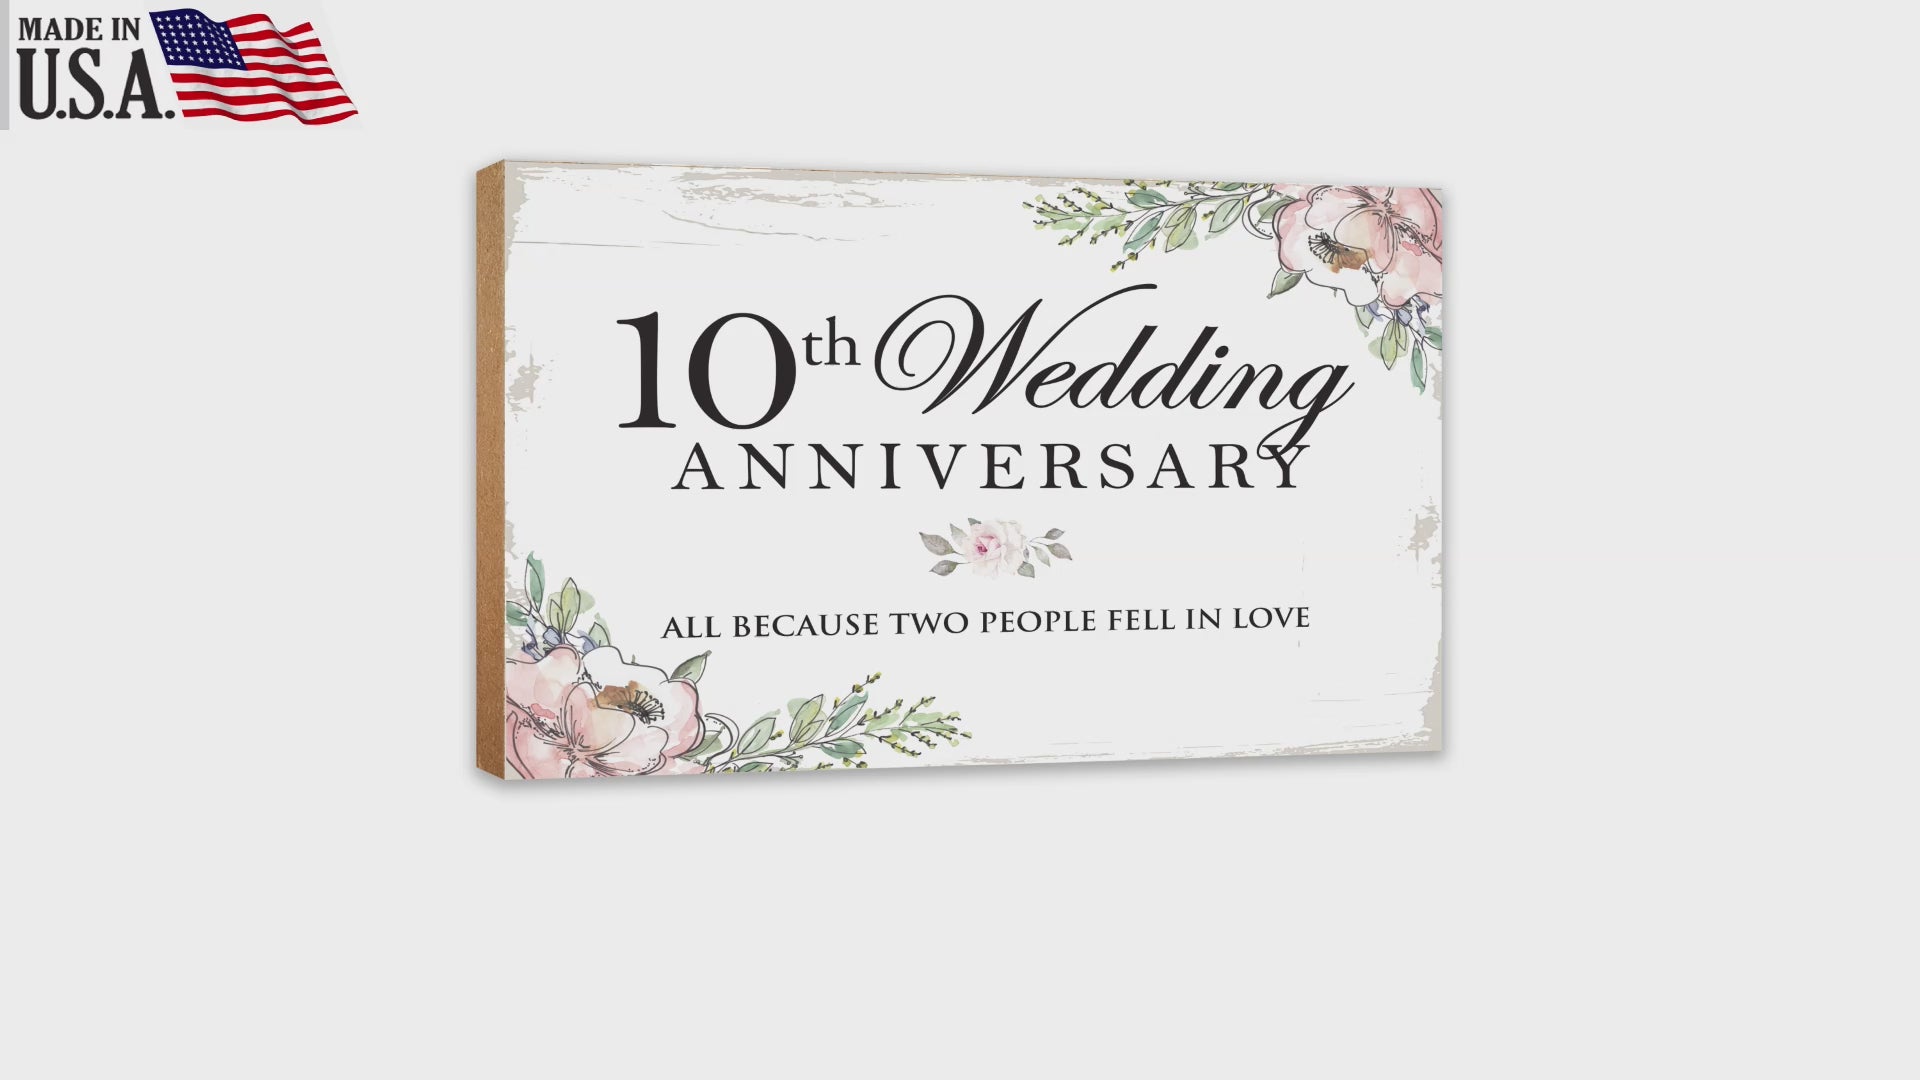 10th Wedding Anniversary Unique Shelf Decor and Tabletop Signs Gifts for Couples - Fell In Love